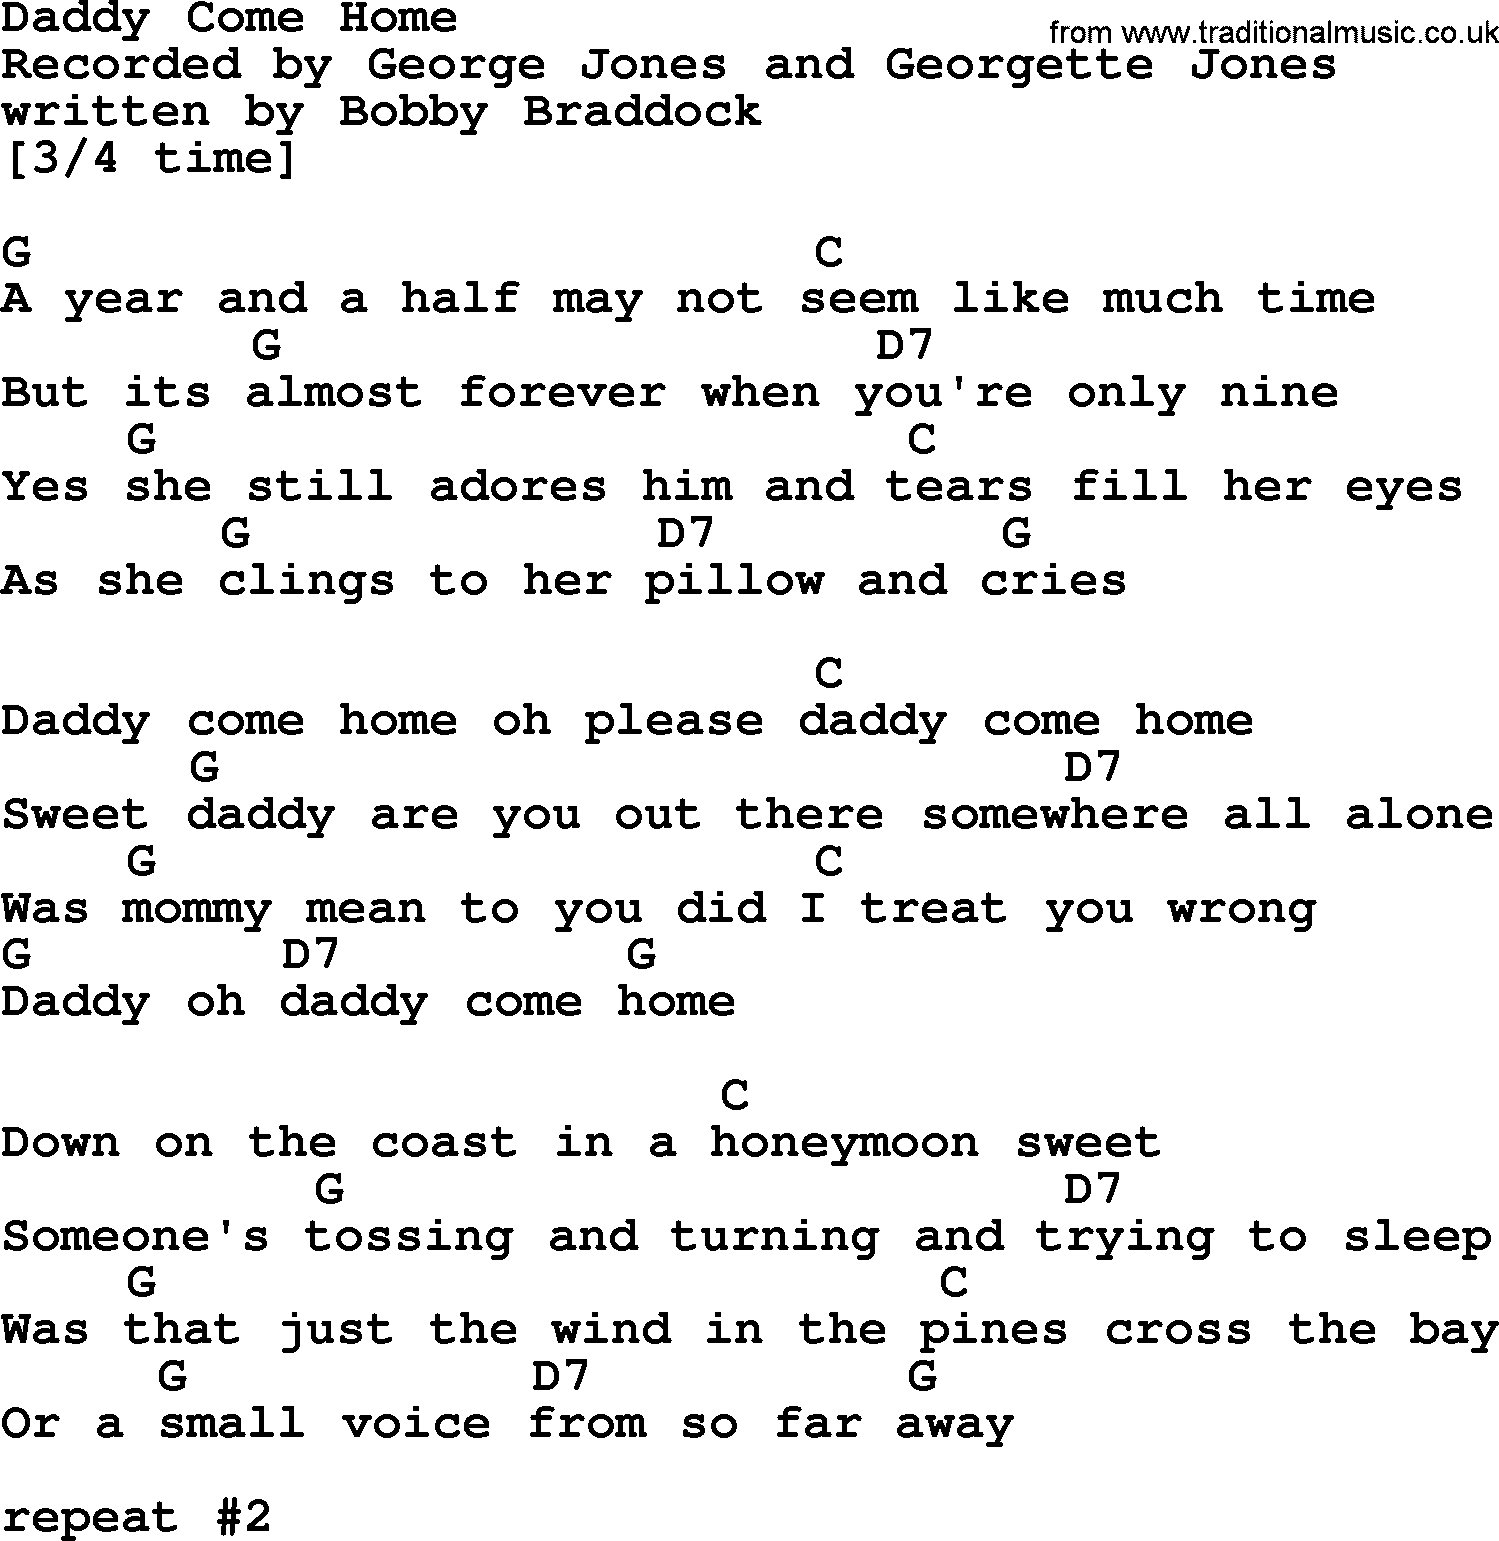 George Jones song: Daddy Come Home, lyrics and chords